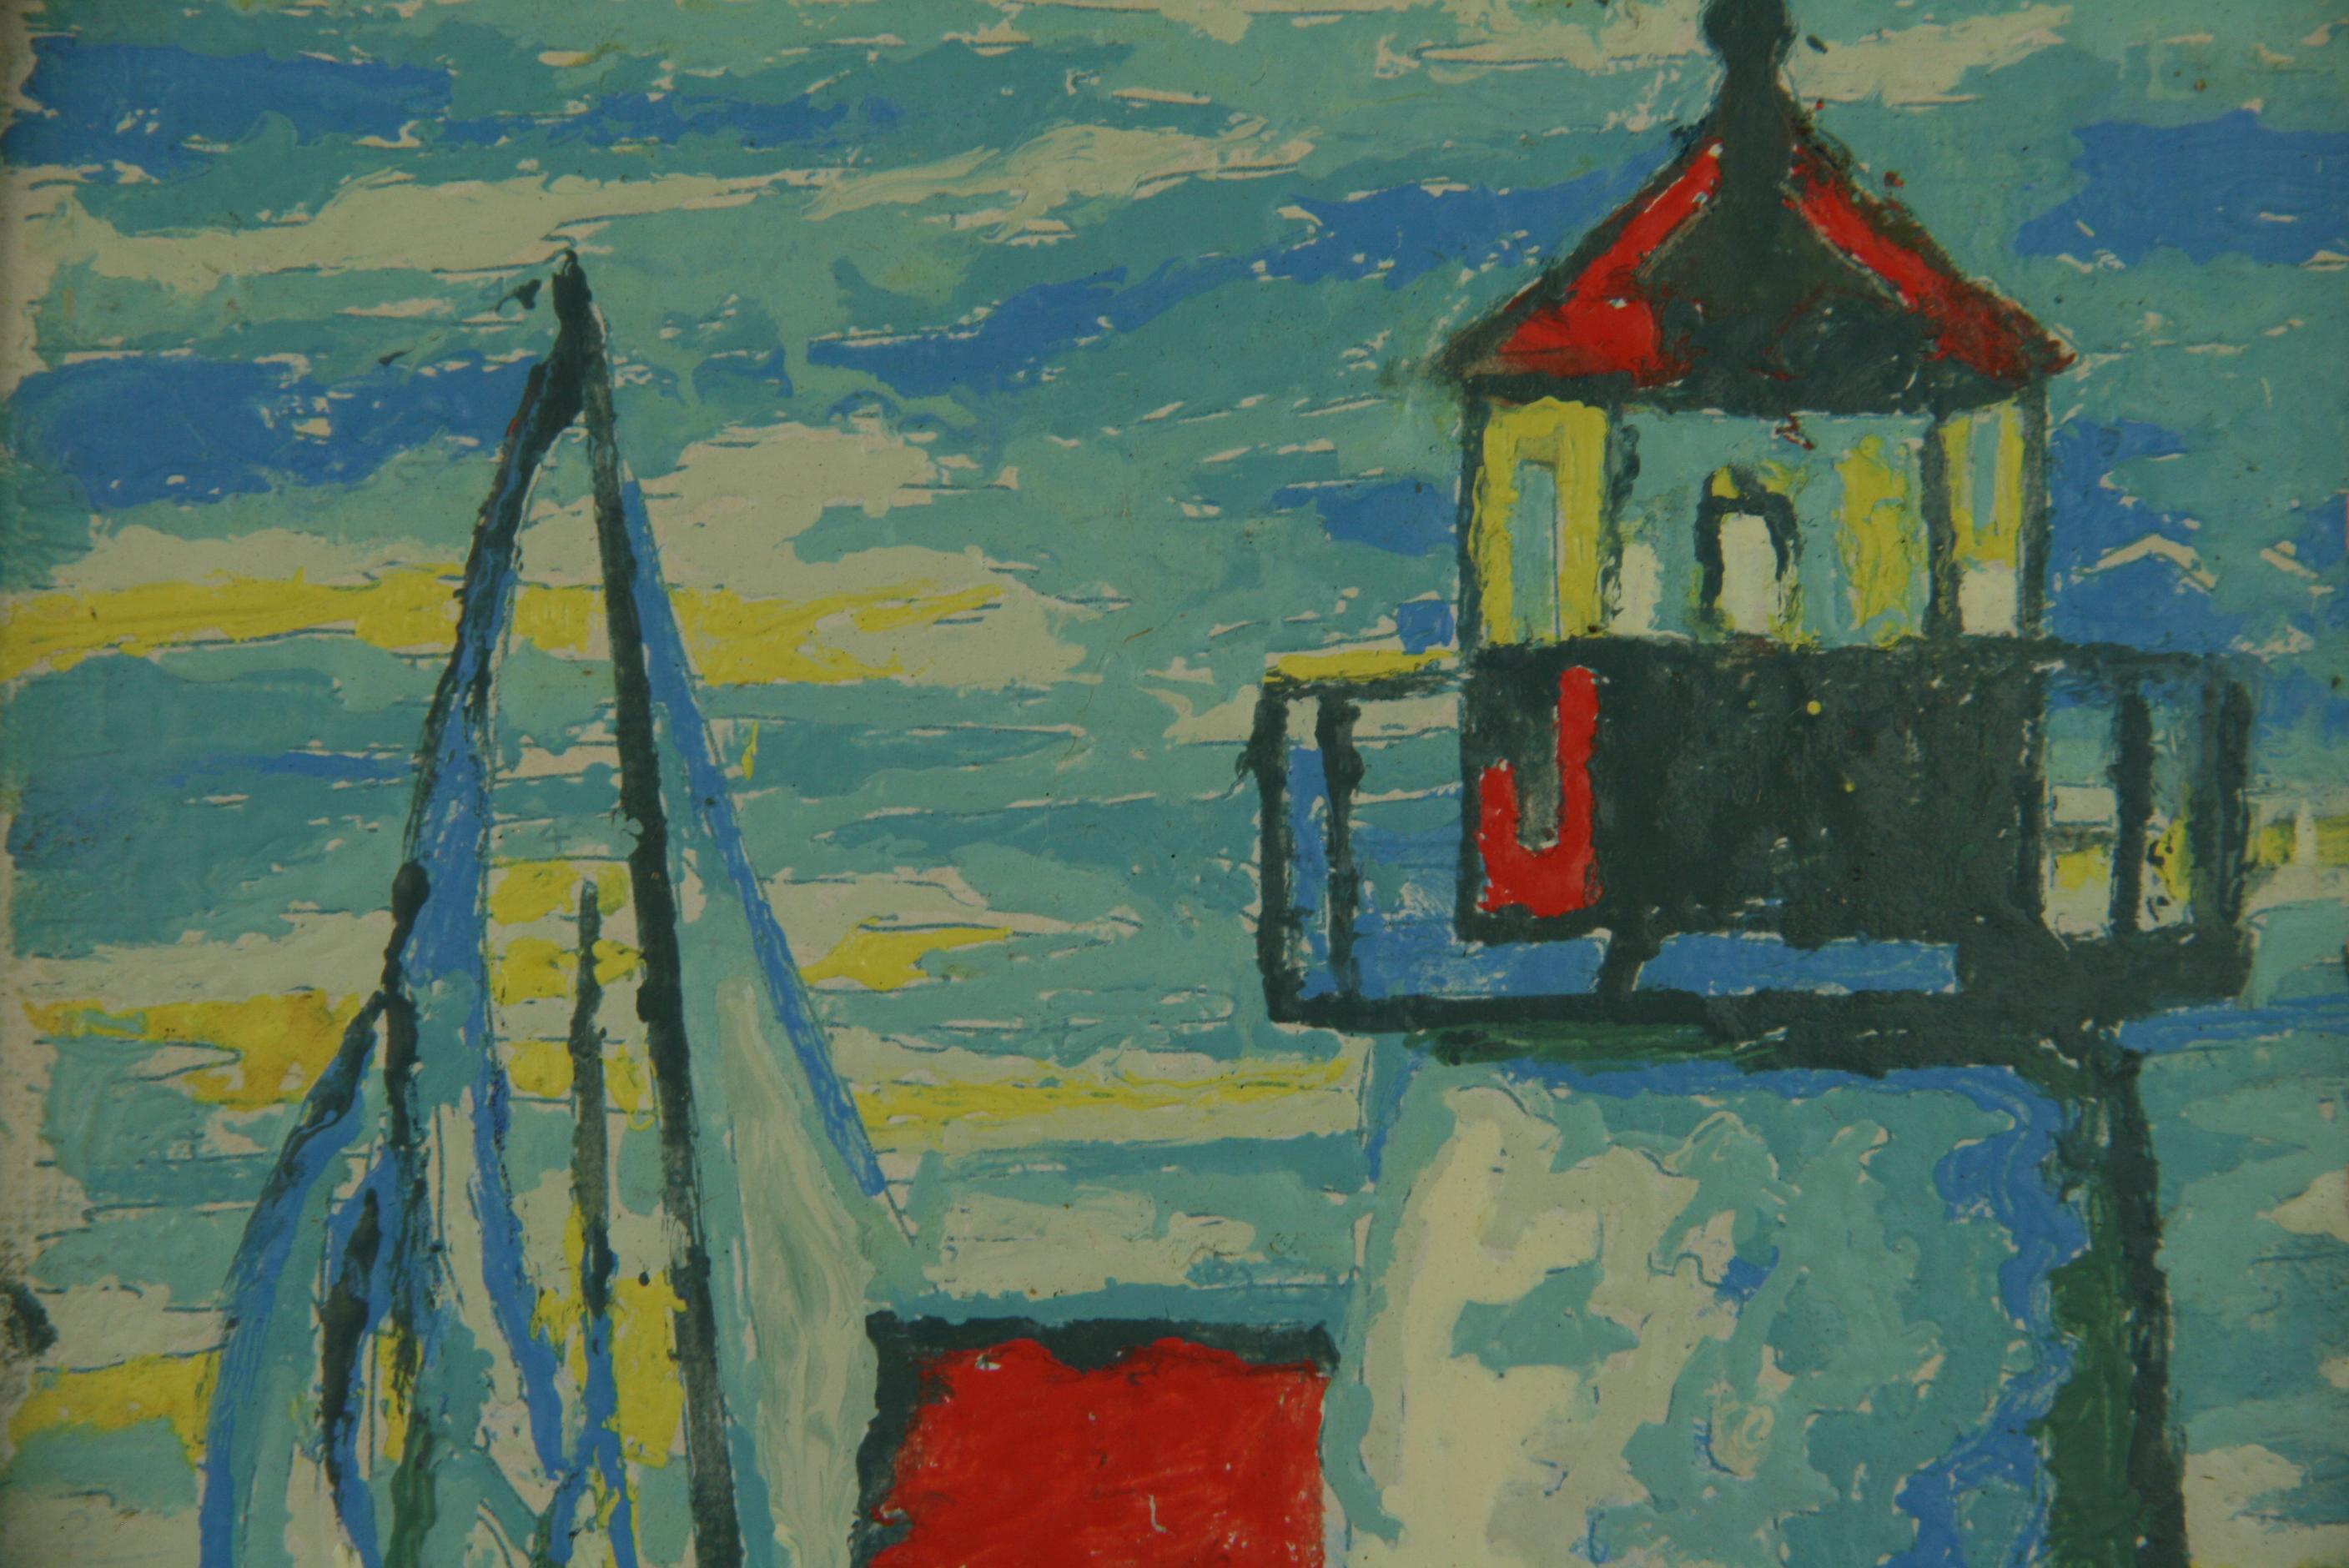 3726 Small landscape painting of a New England lighthouse   with sailboats in backround
Signed on back